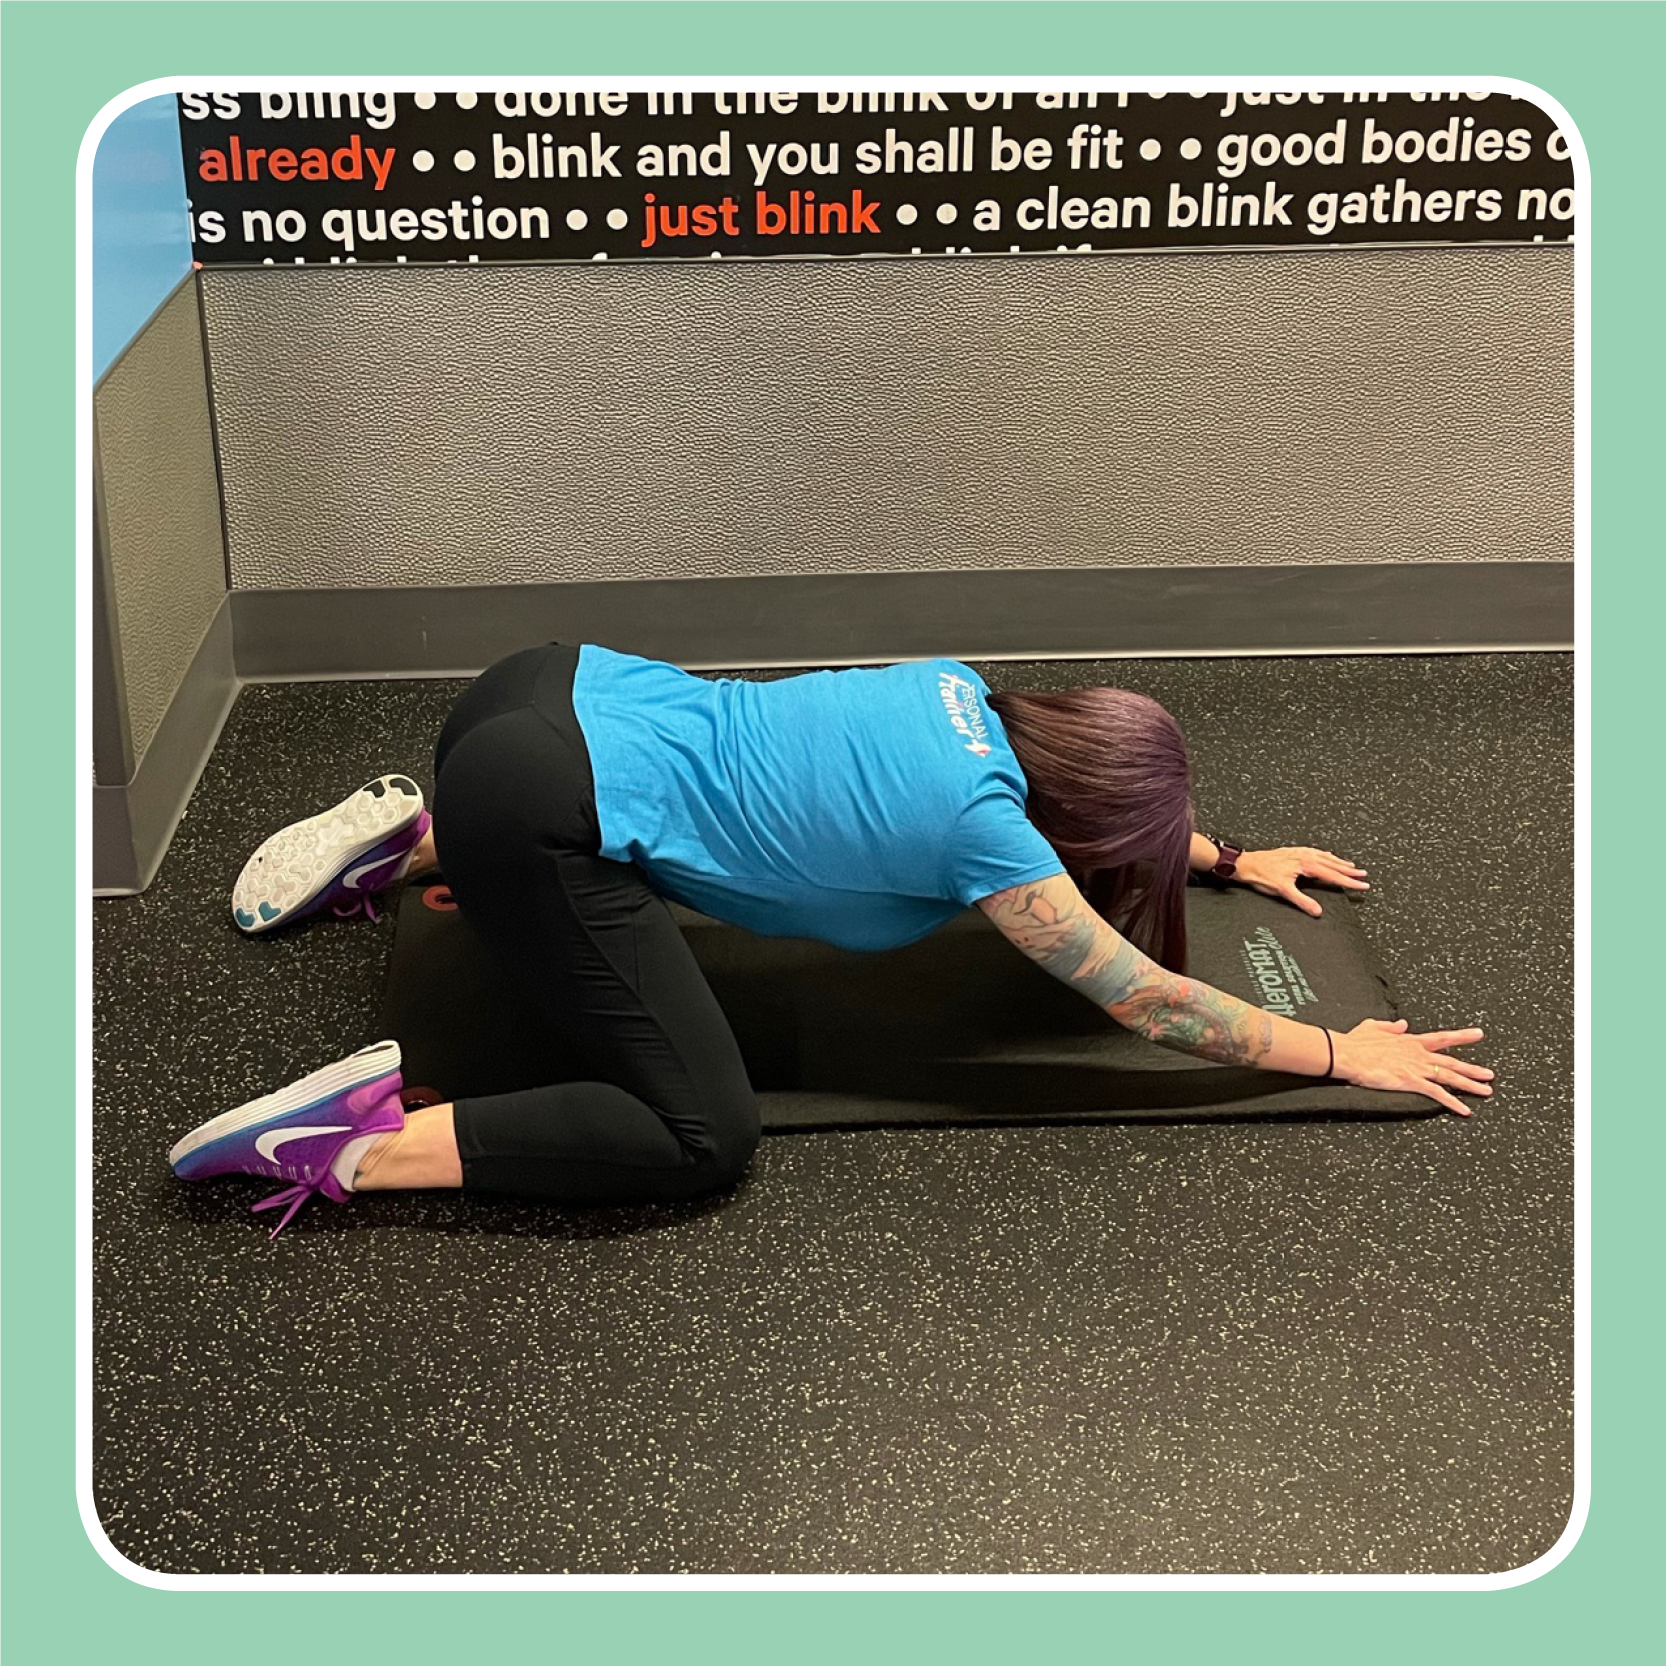 Are Your Hip Flexors Weak? Reasons You Should Be Stretching AND Streng